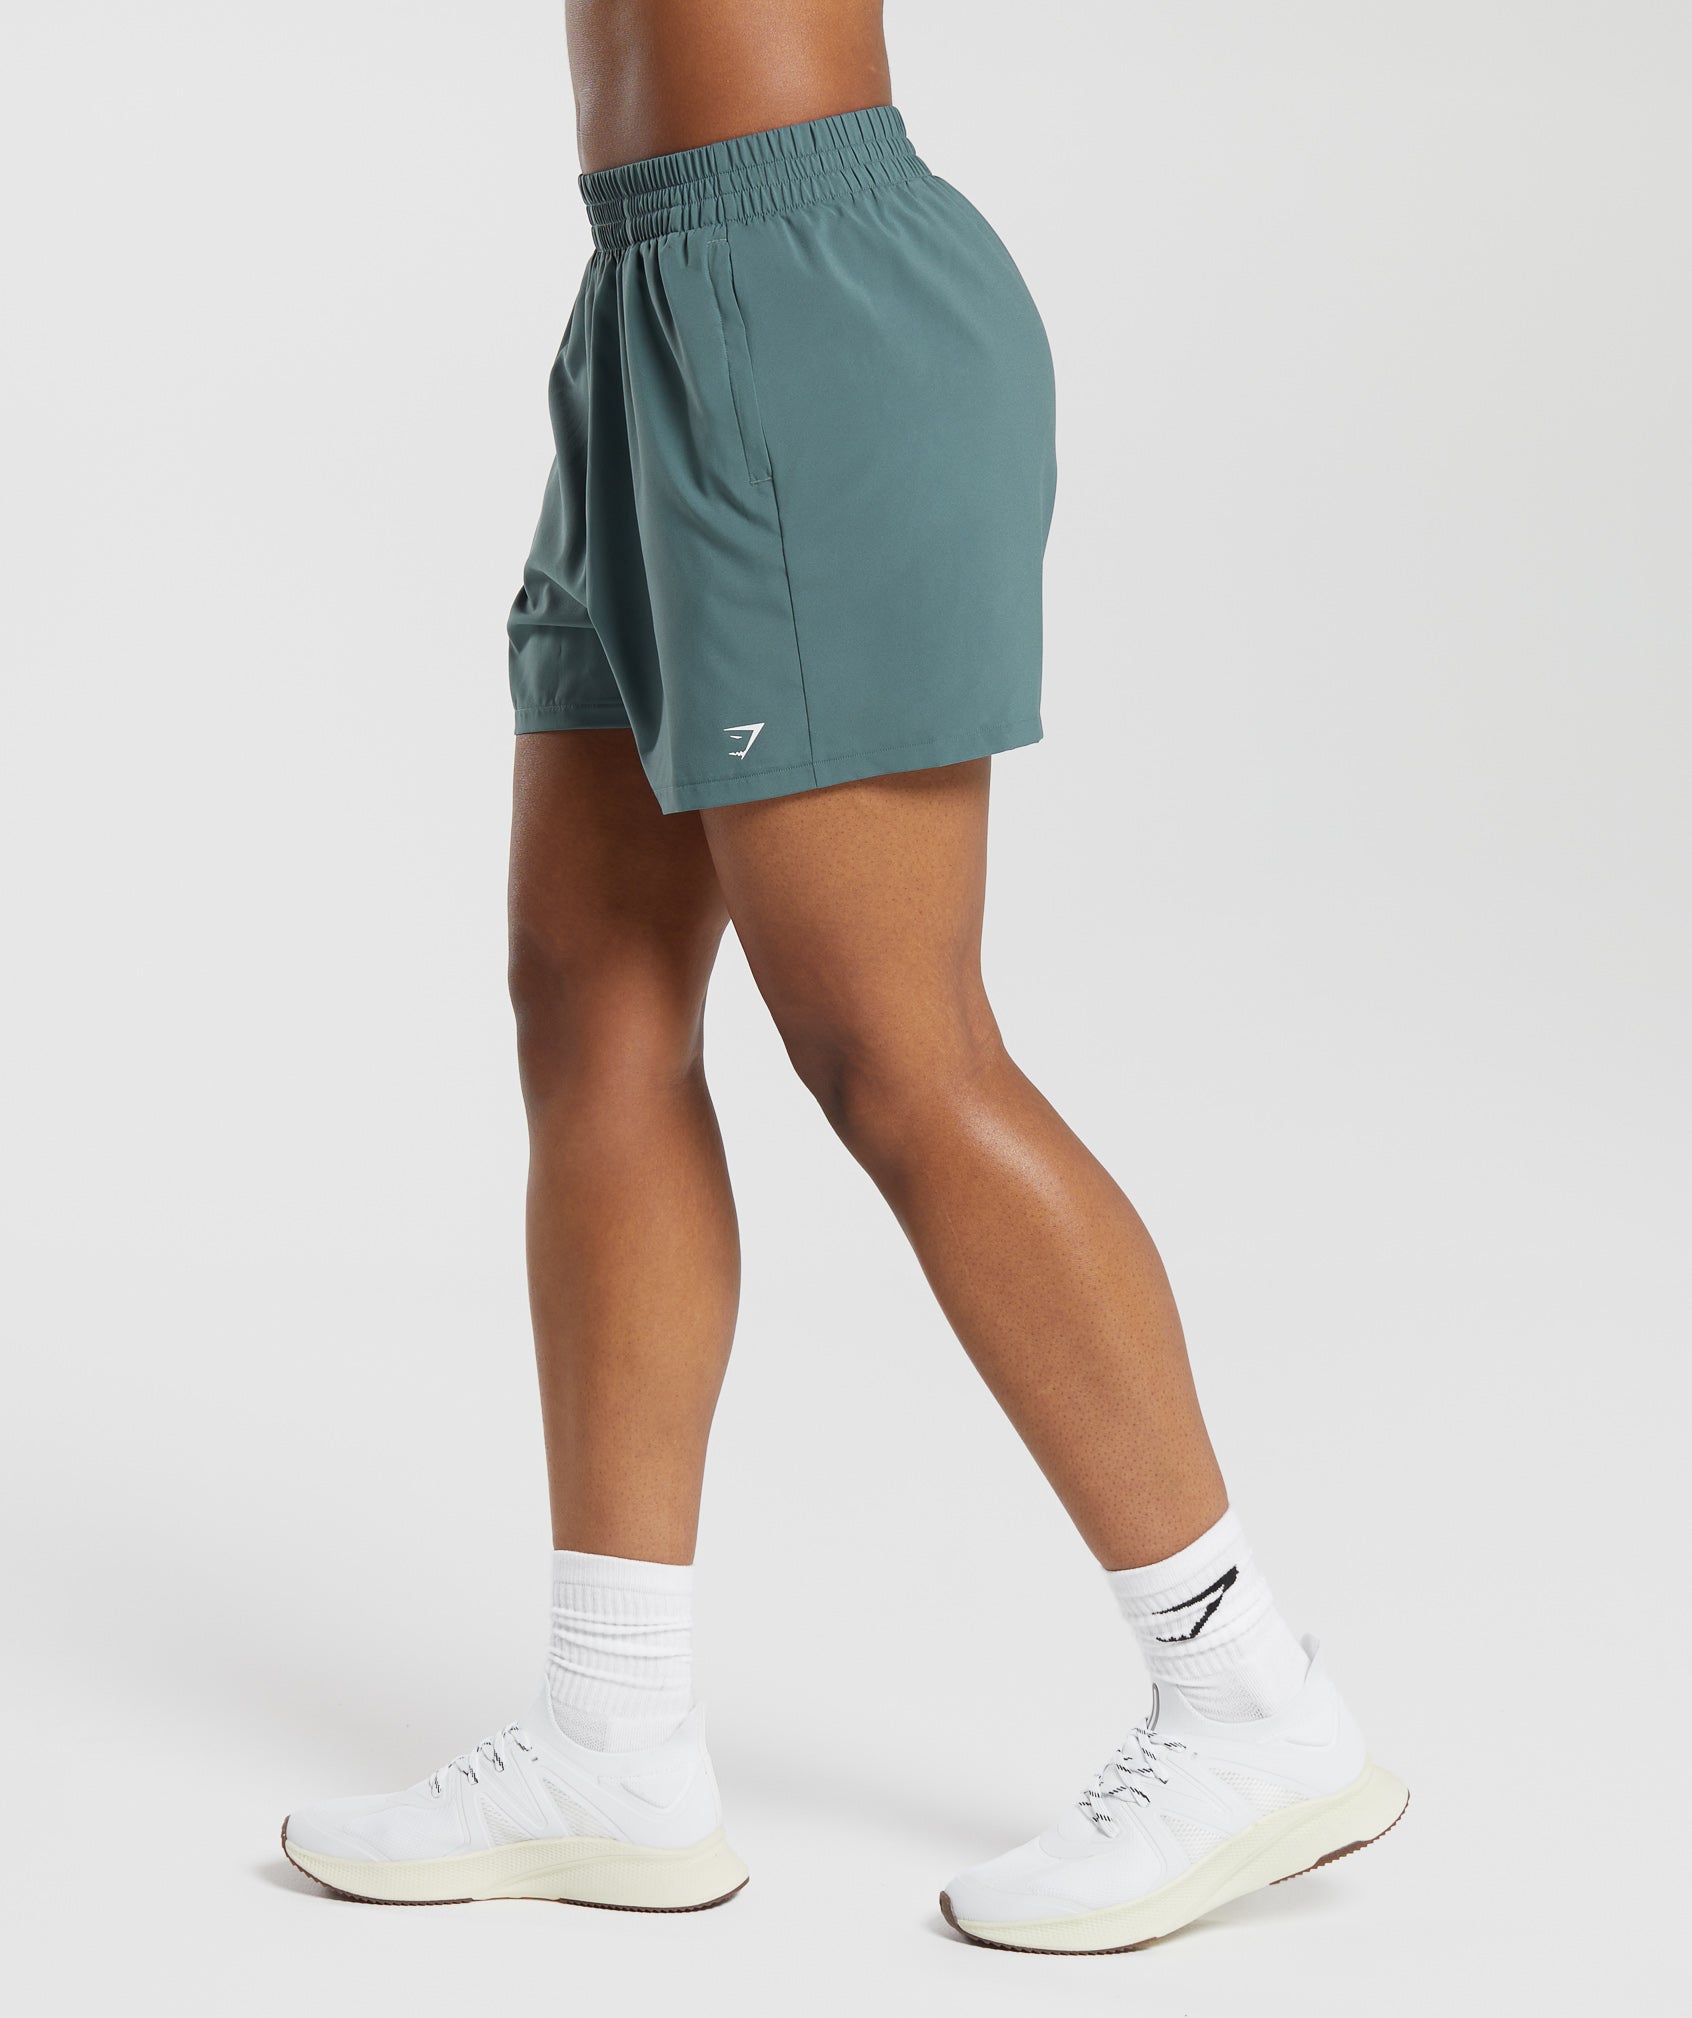 Woven Pocket Shorts in Denim Teal - view 3